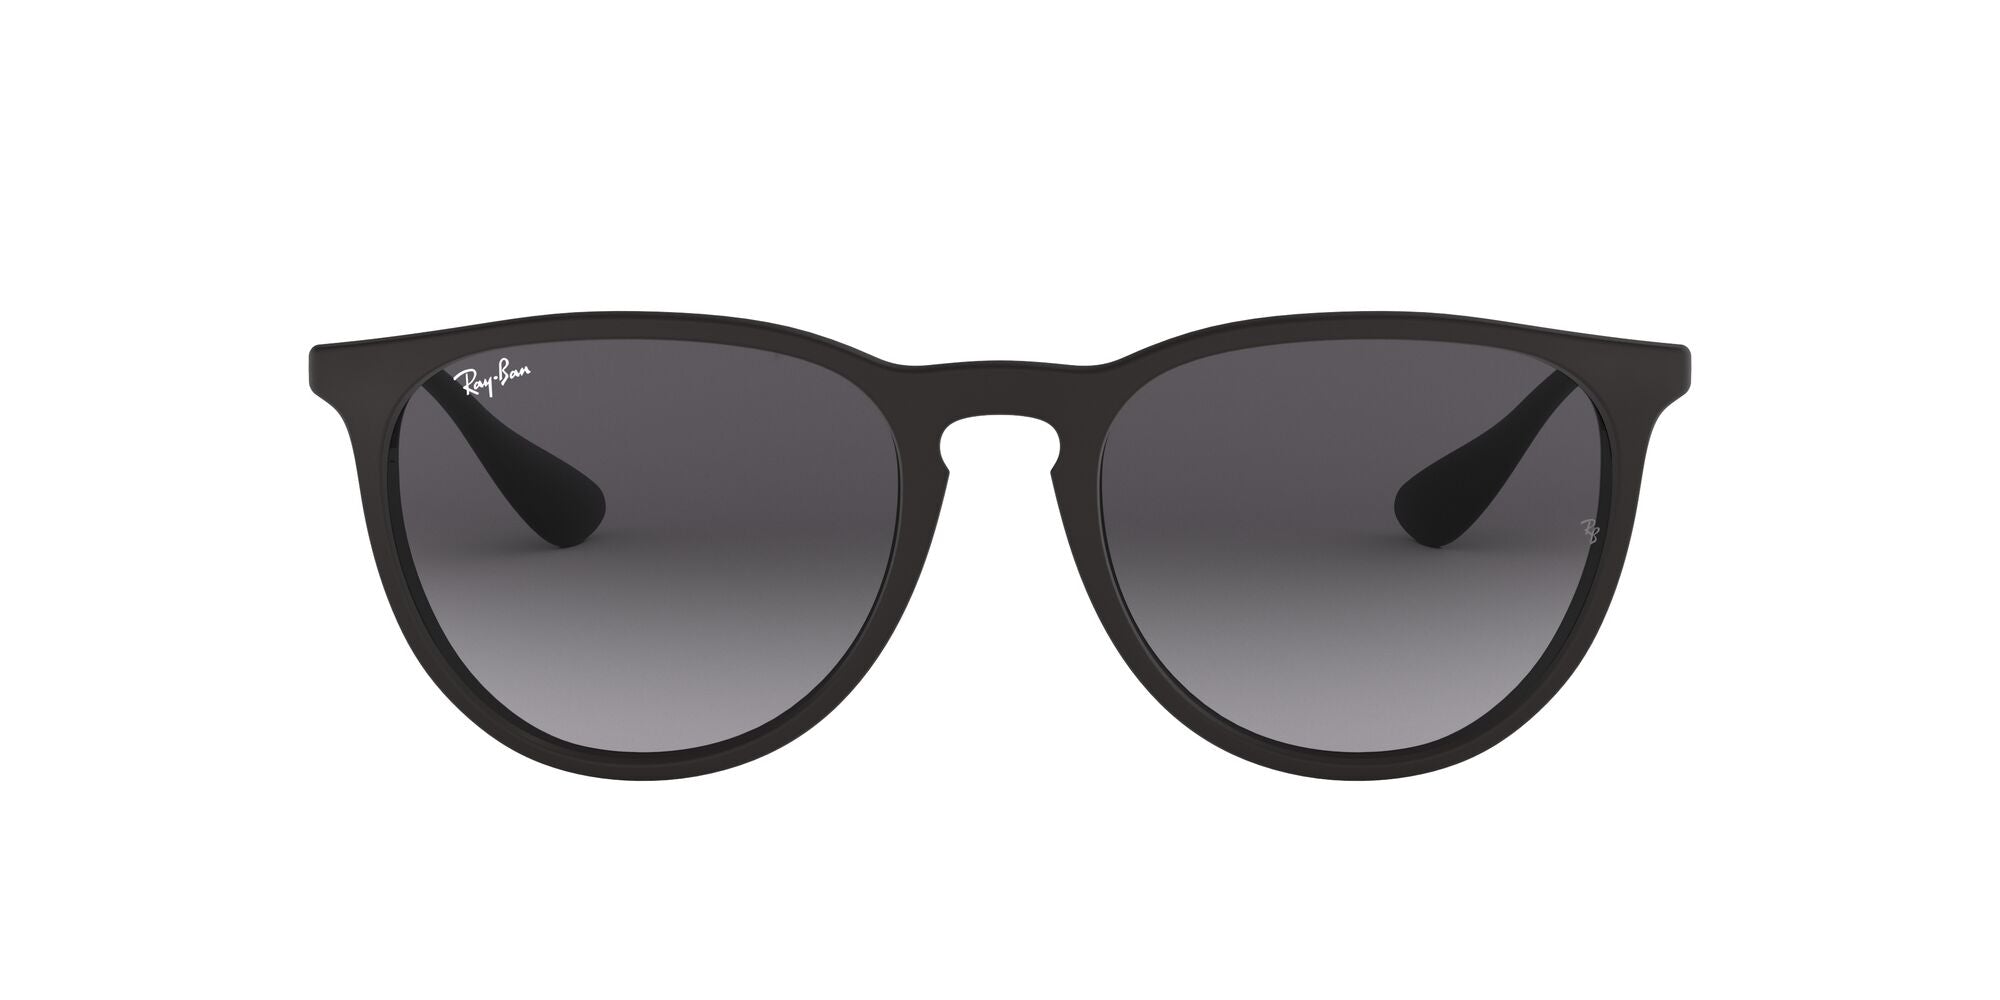 Ray Ban Sunglasses: Iconic Shades for All